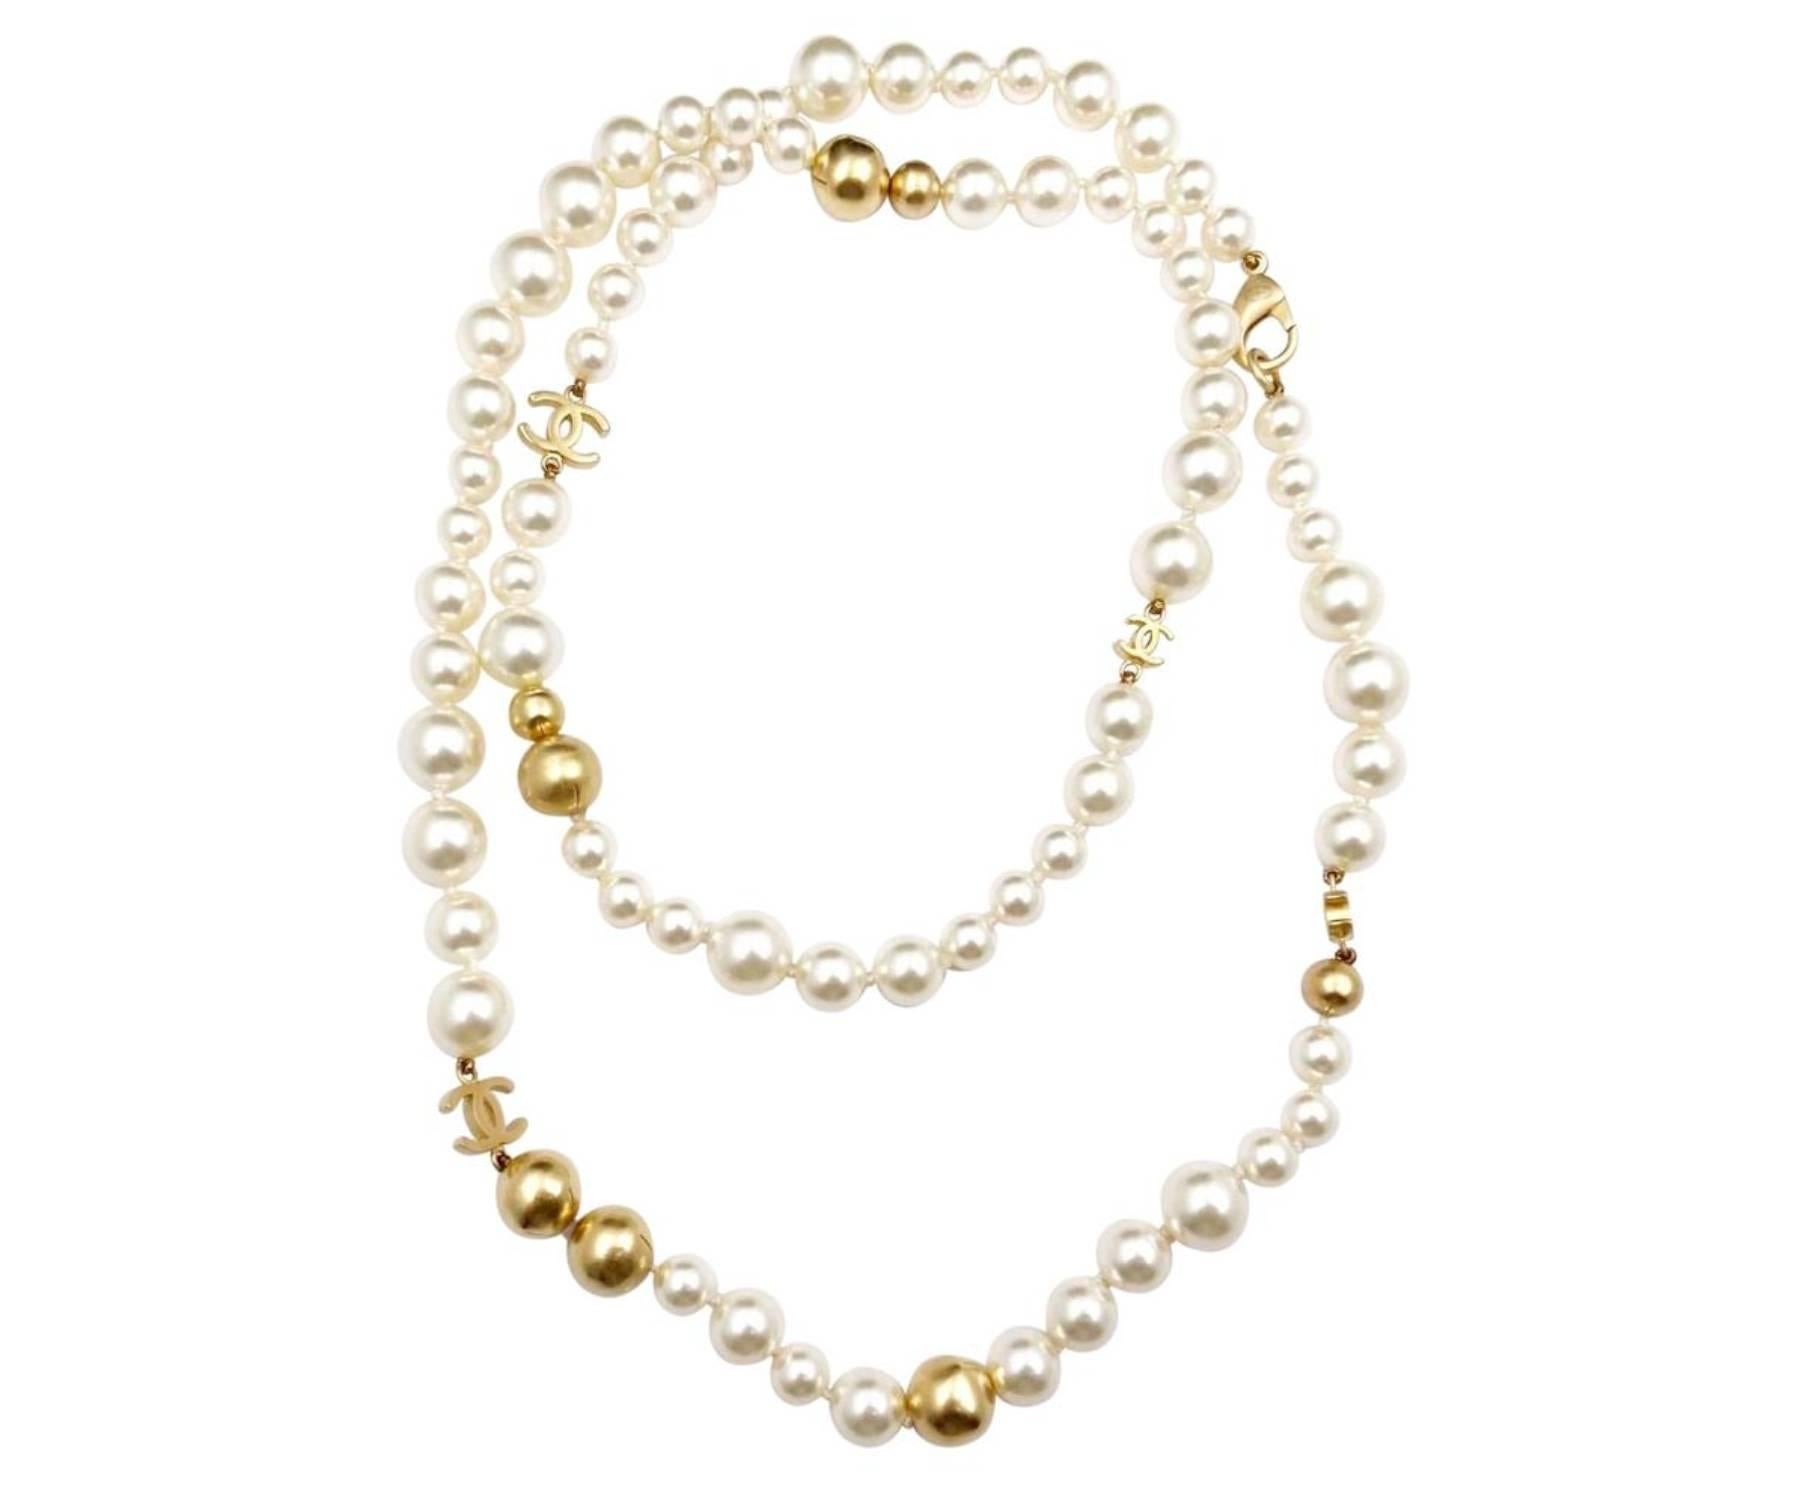 Chanel Gold CC Bead Faux Pearl Long Necklace

*Marked 07
*Made in Italy
*Comes with original box

-The chain is approximately 36″ long.
-It is very classic and great with any outfits.
-In an excellent condition

4017-49446